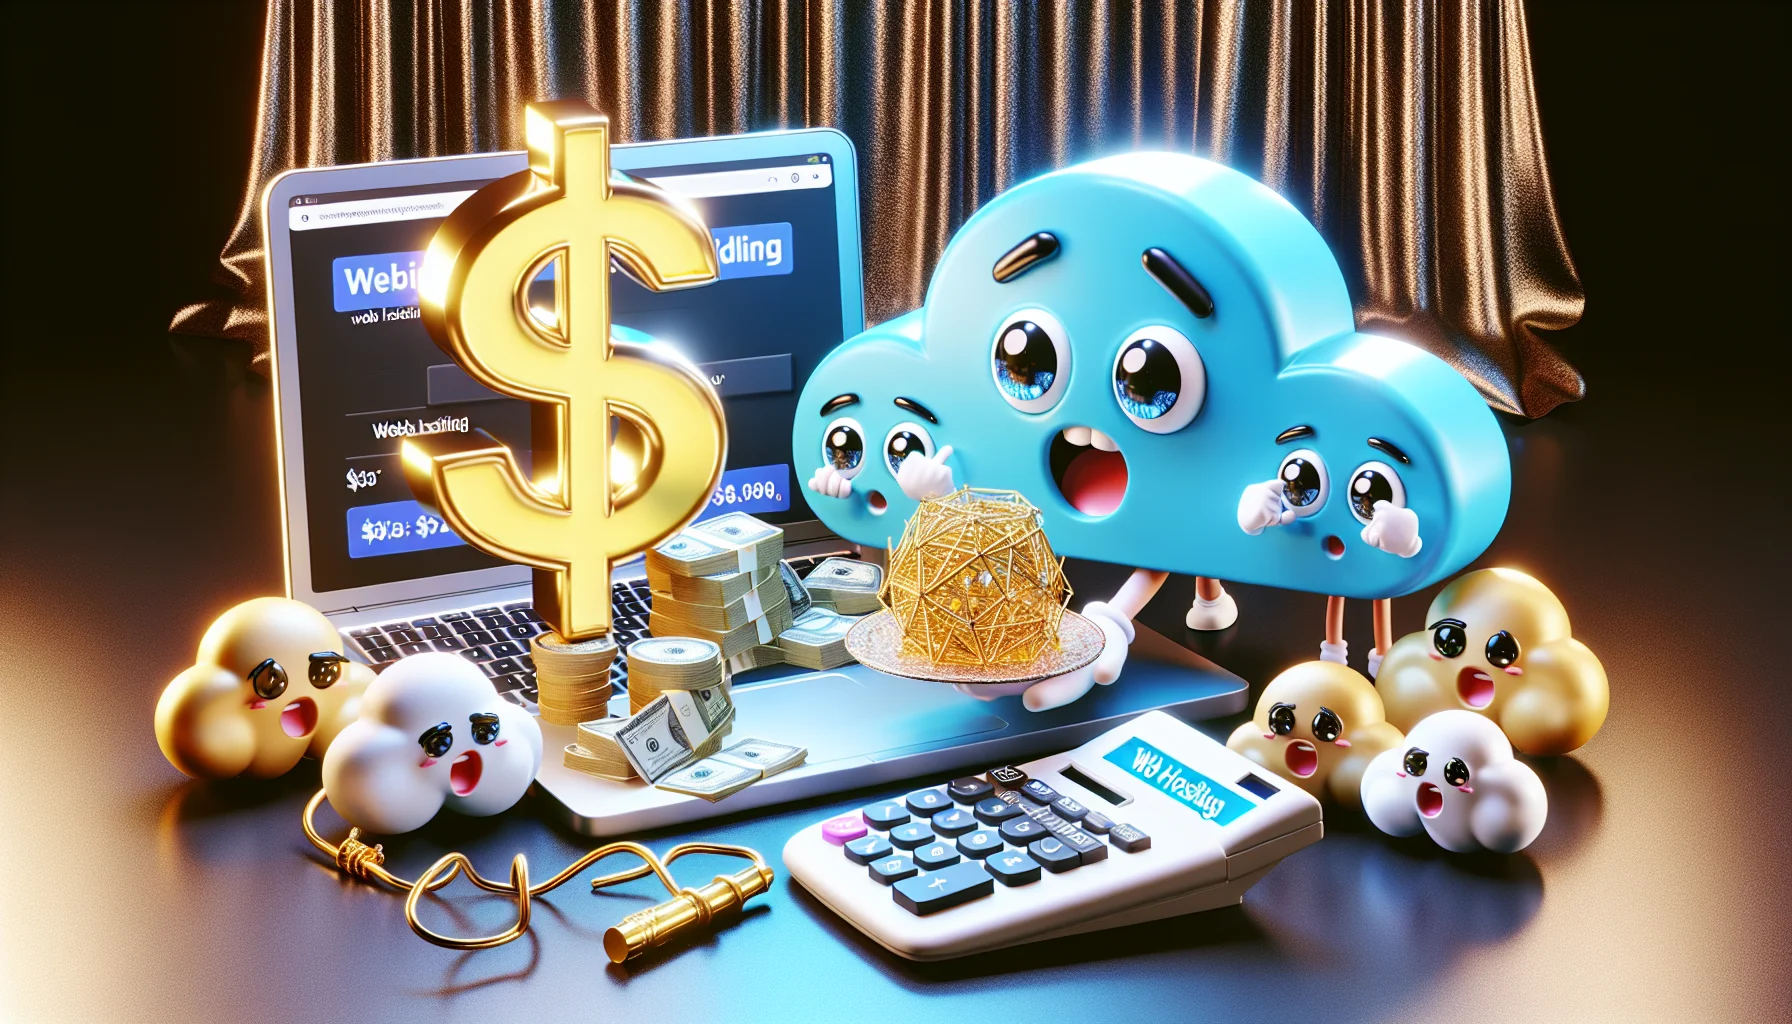 An imaginative scenario demonstrating the cost of using a generic online website builder in a humorous light. The scene focuses on a large, glowing computer screen with a cartoony dollar sign, indicating the calculator for website building costs. A group of amiable, quirky internet mascots, consisting of an Asian male cloud symbol, a Middle-Eastern female Wi-Fi symbol, and a black non-binary Ethernet cable symbol, are all gazing at the screen with surprised expressions. To add the element of enticement for web hosting, there's an image of a golden key with 'web hosting' engraved on it, shimmering enticingly on a satin cushion nearby.